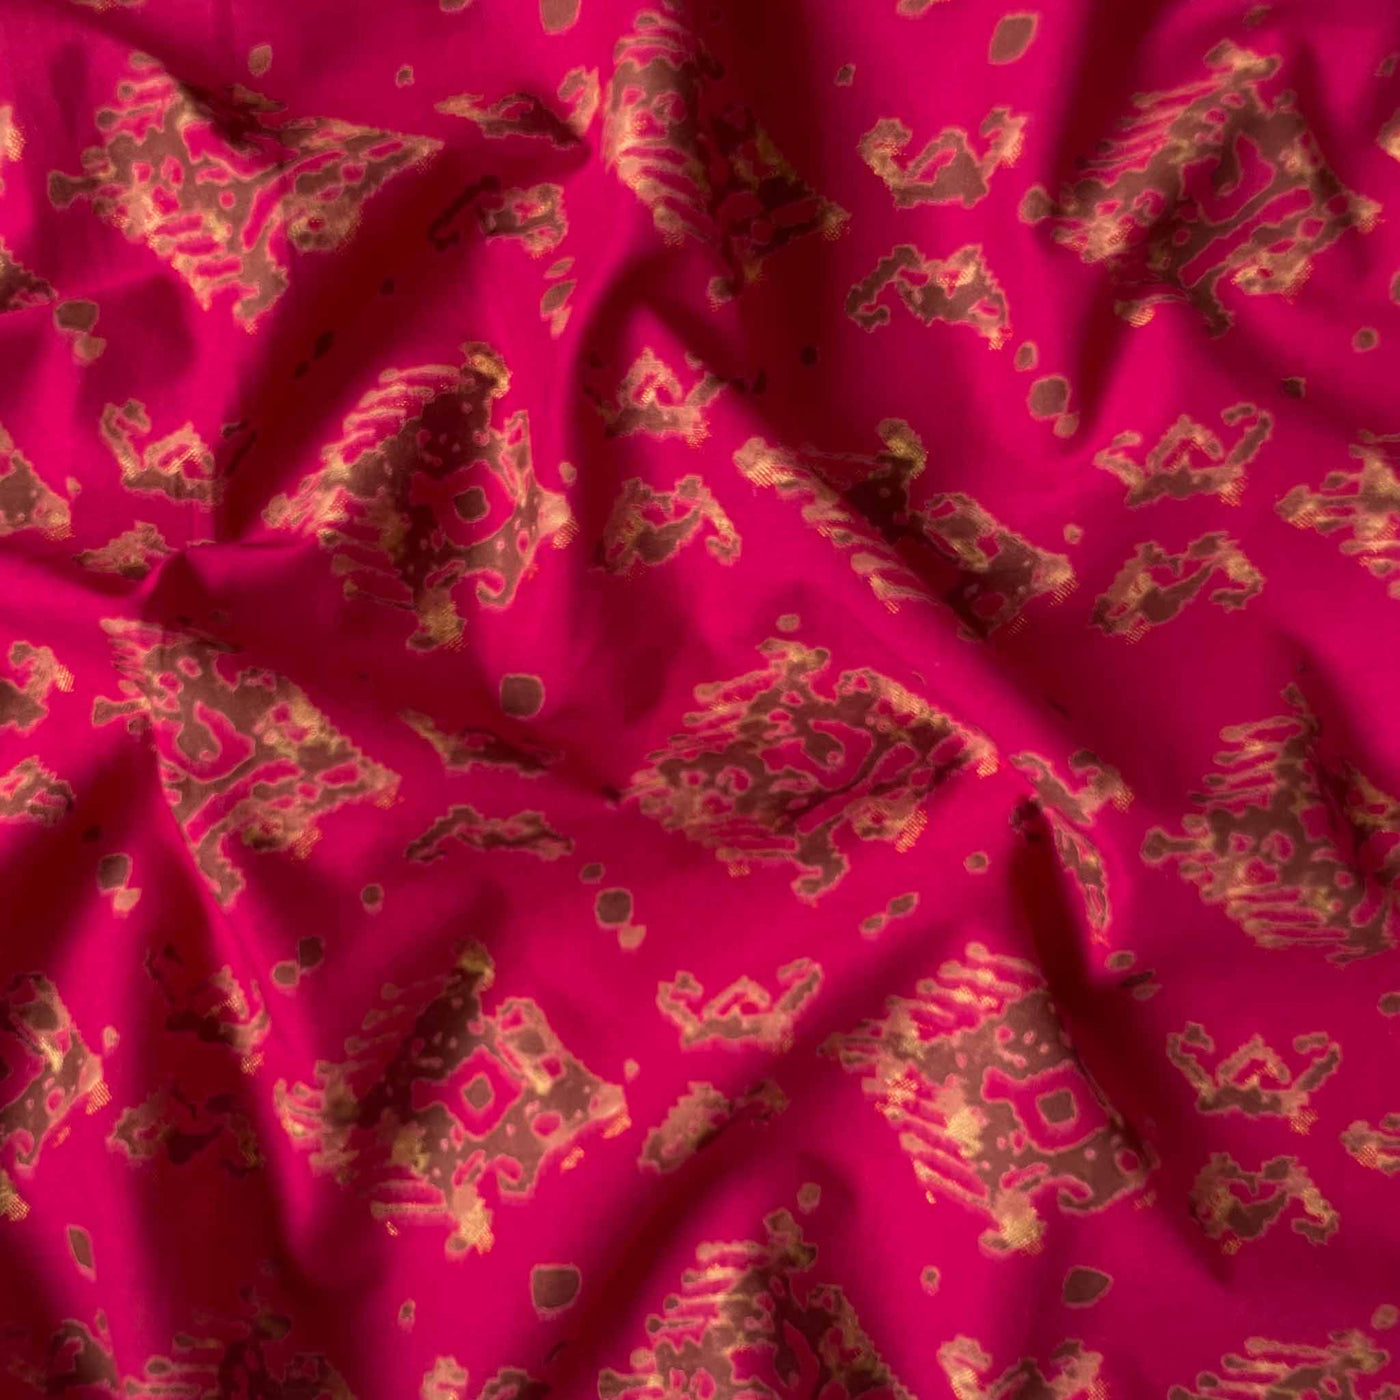 Screen Printed Cotton Fabric Cut Piece (CUT PIECE) Maroon & Gold Abstract Floral Discharge Print Pure Cotton Fabric (Width 43 inches)